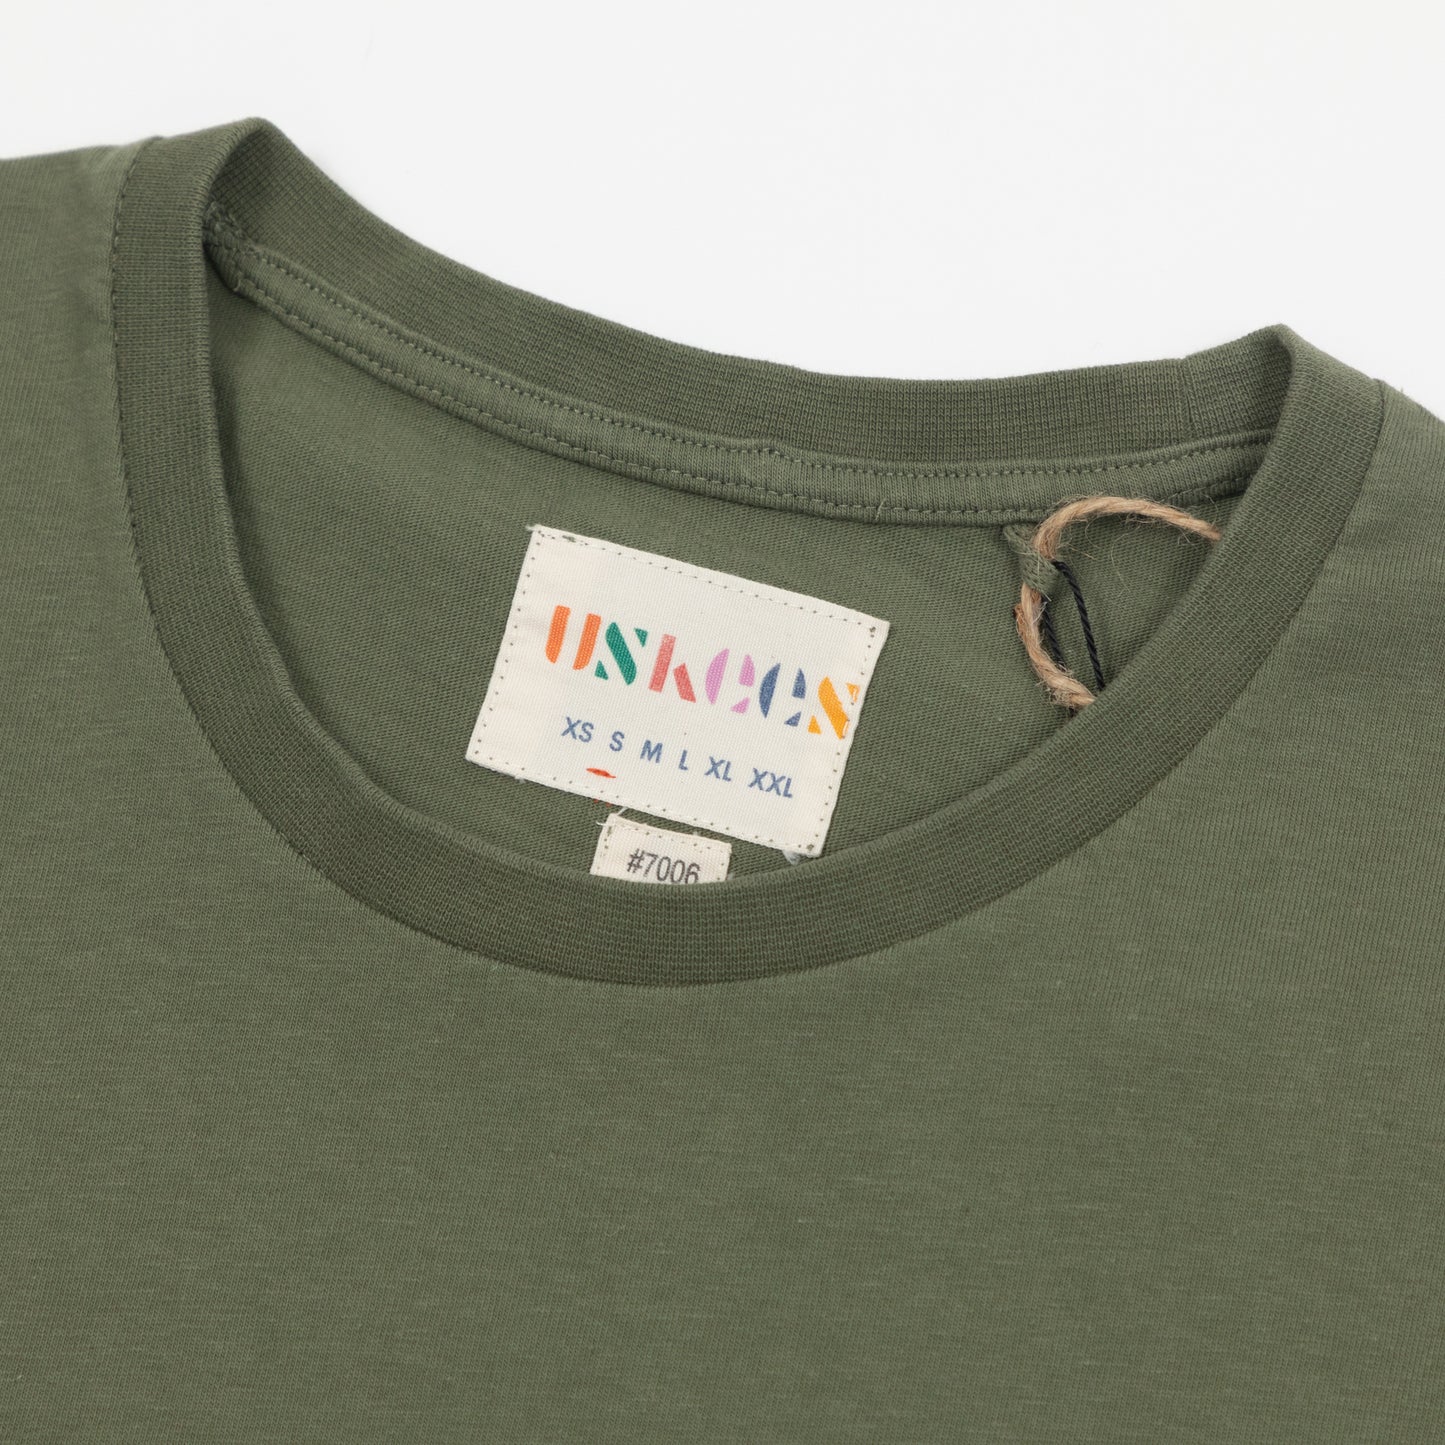 USKEES Loose Fit Short Sleeve T-Shirt in ARMY GREEN